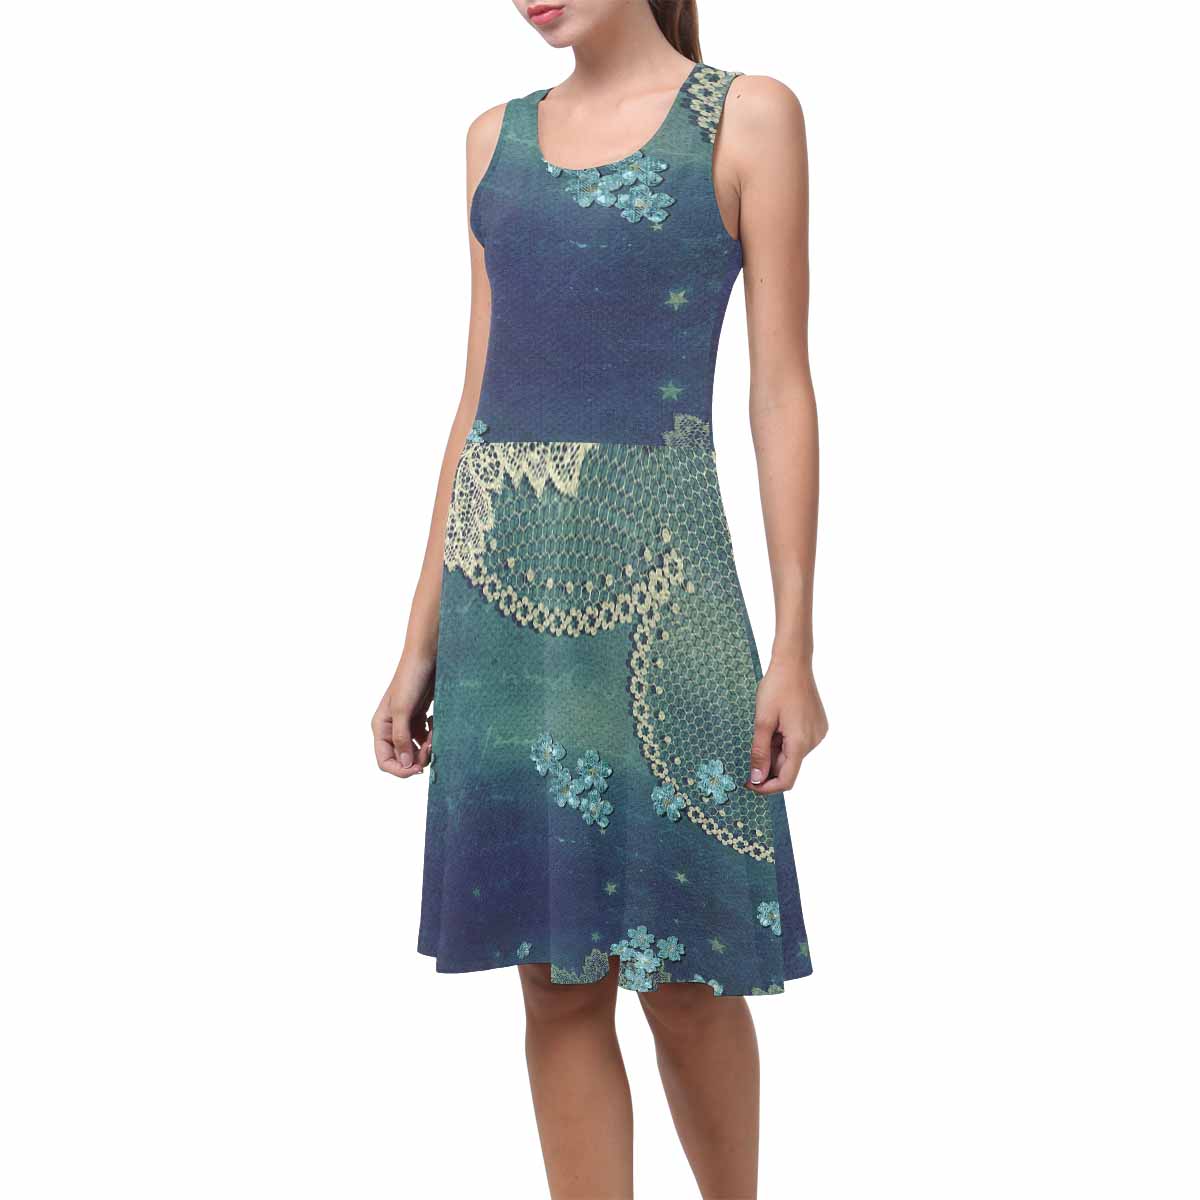 Victorian printed lace summer dress, Design 04